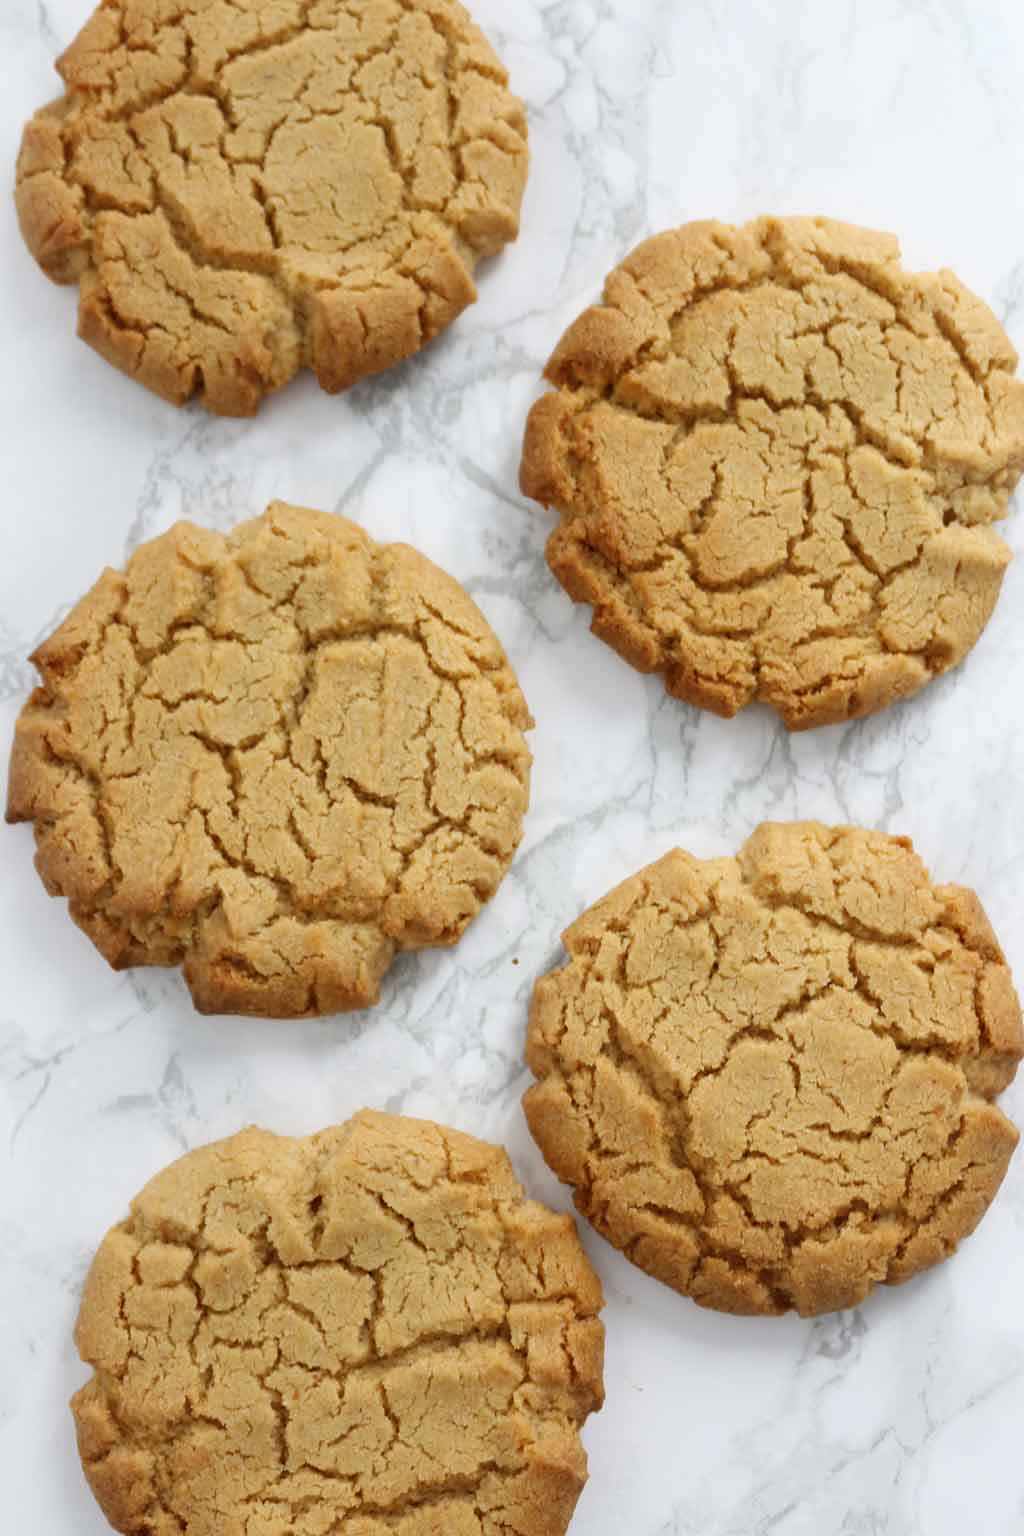 Vegan Peanut Butter Cookies laying flat on a white surface